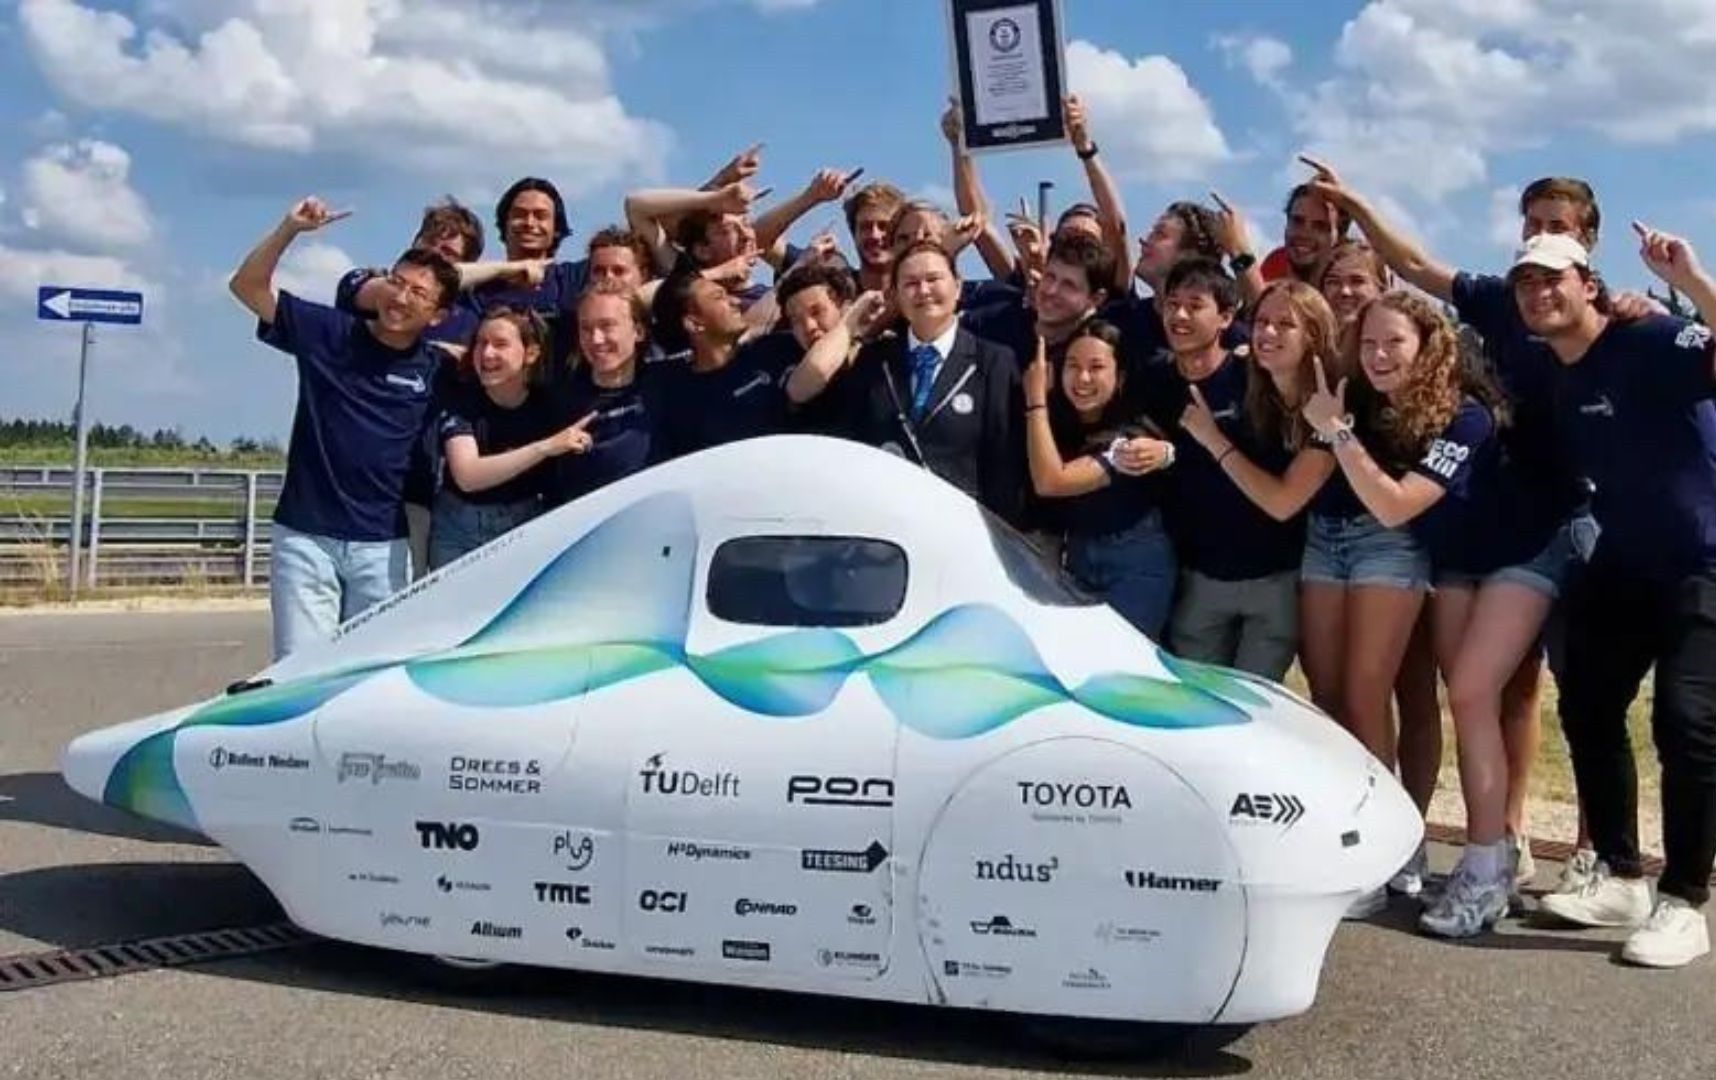 Hydrogen-fueled car sets new Guinness World Record